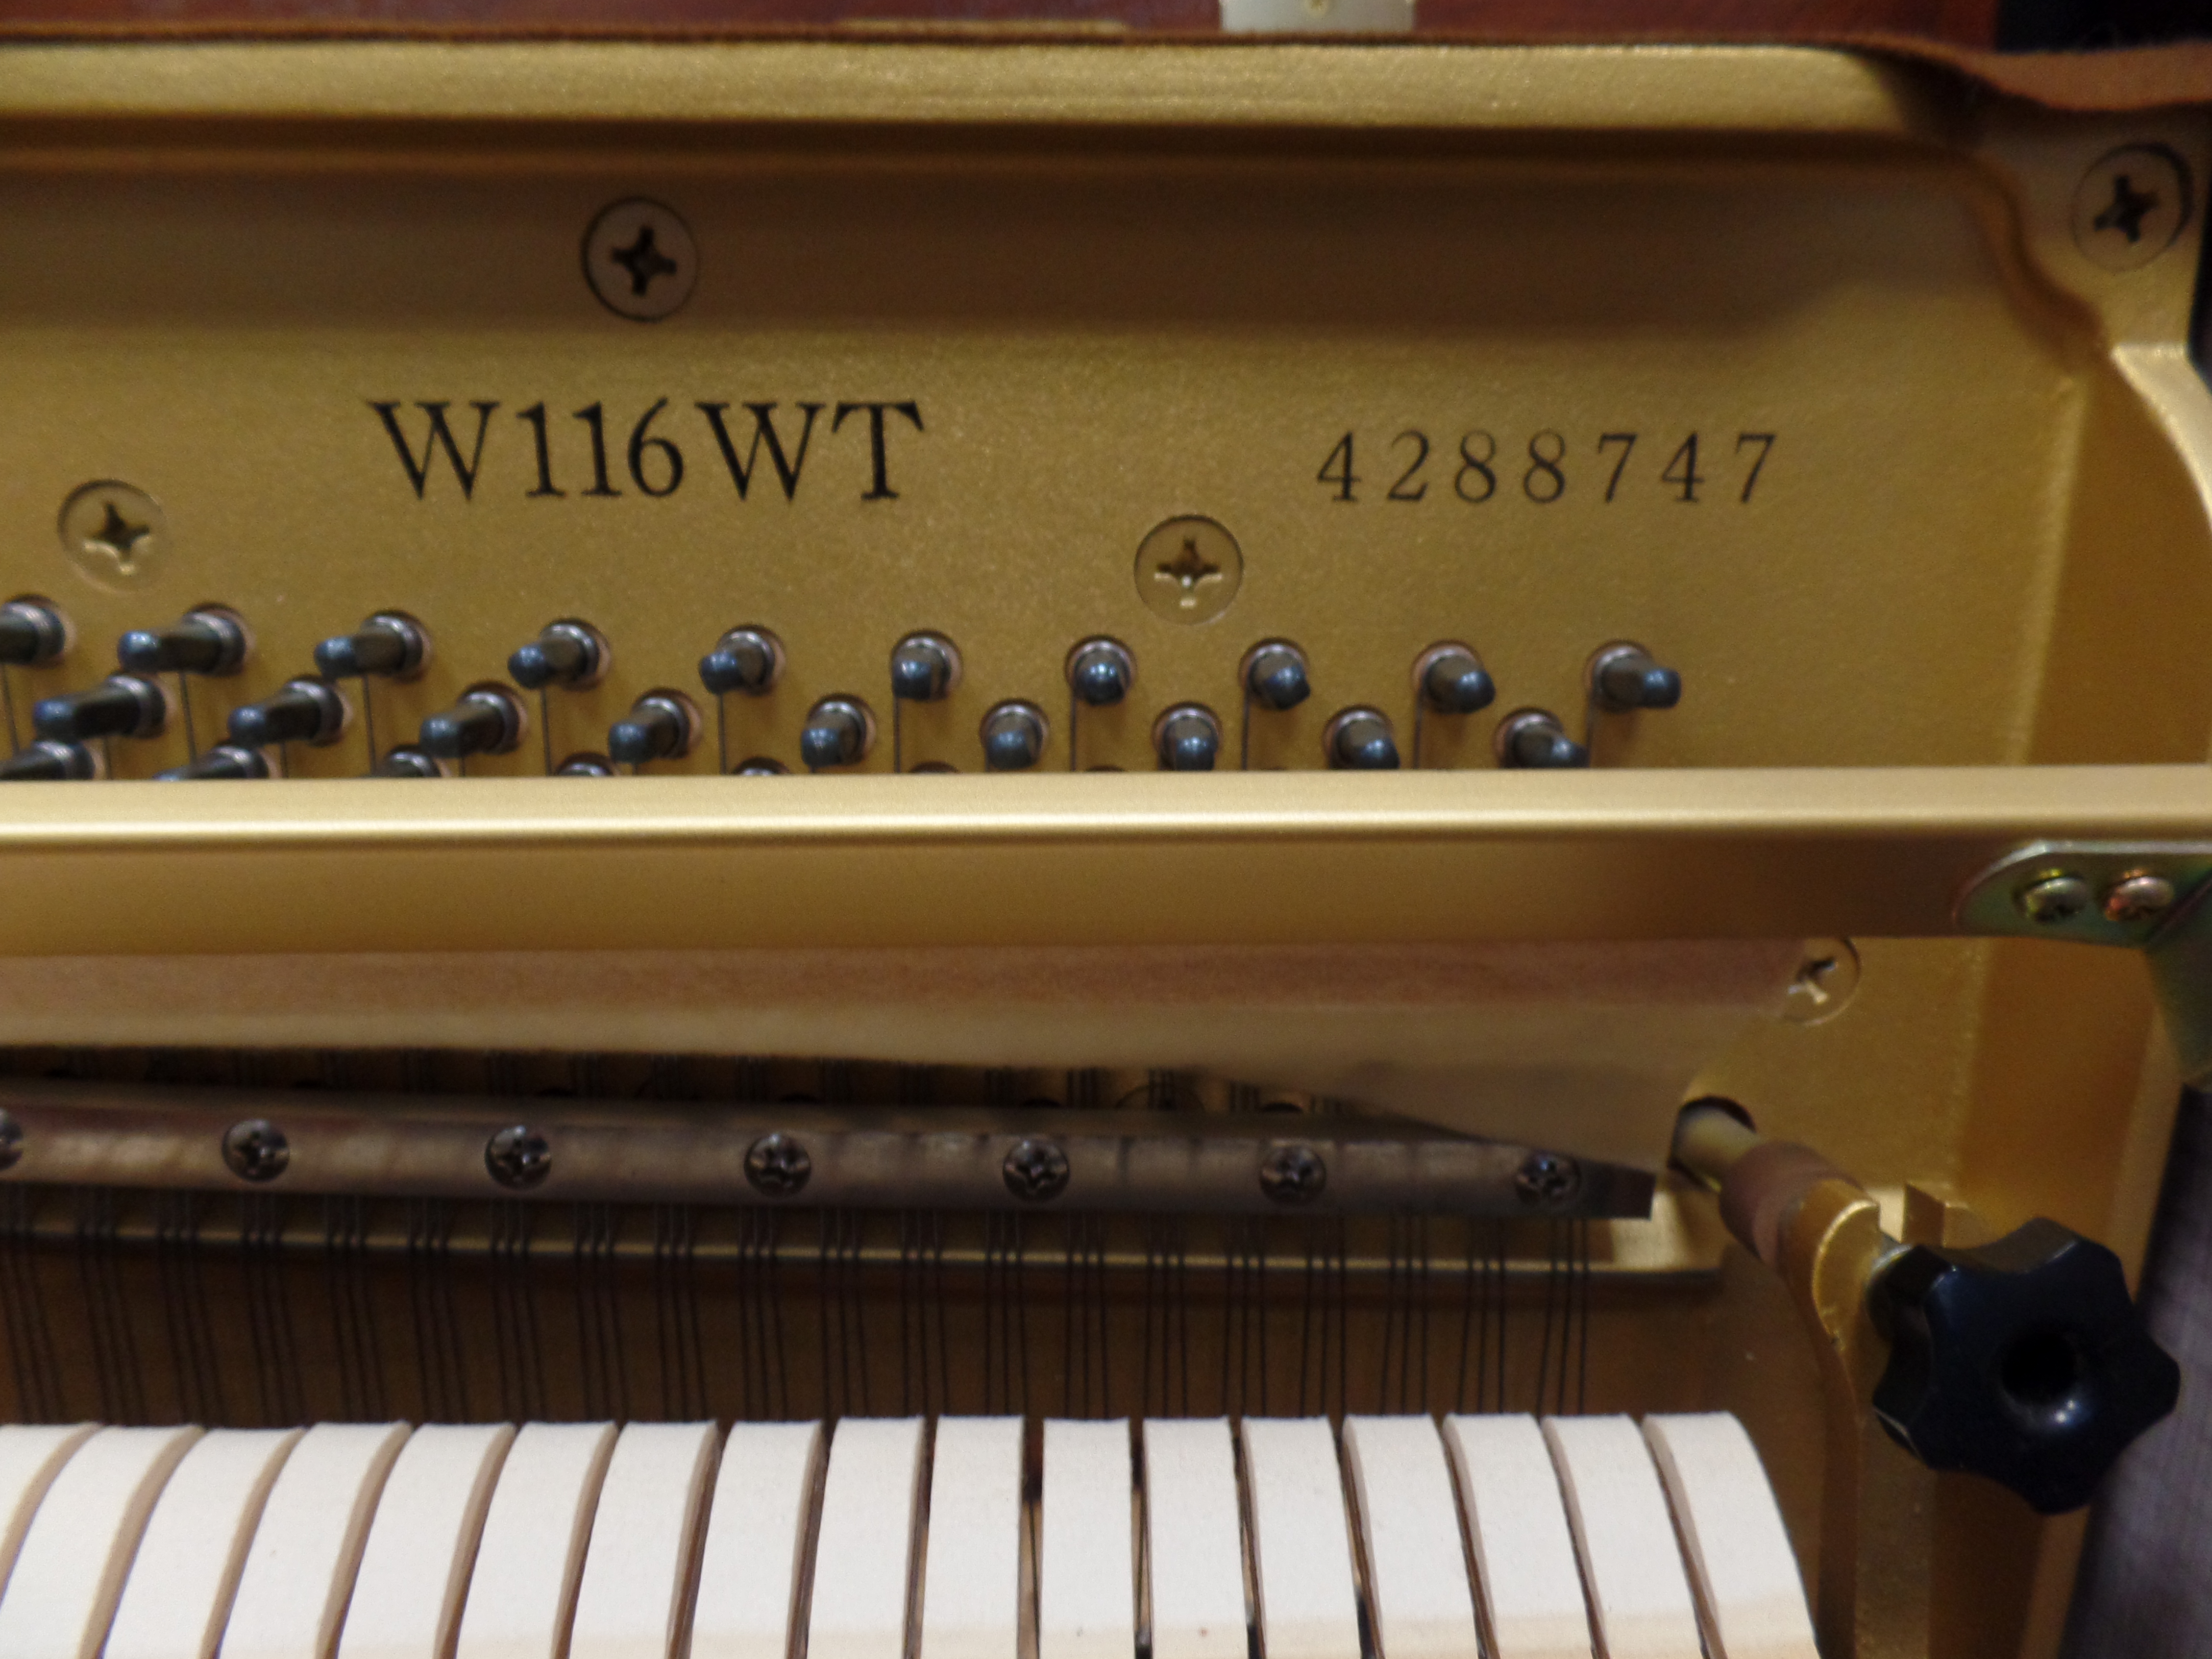 Yamaha W116WT Serial Number 4288747